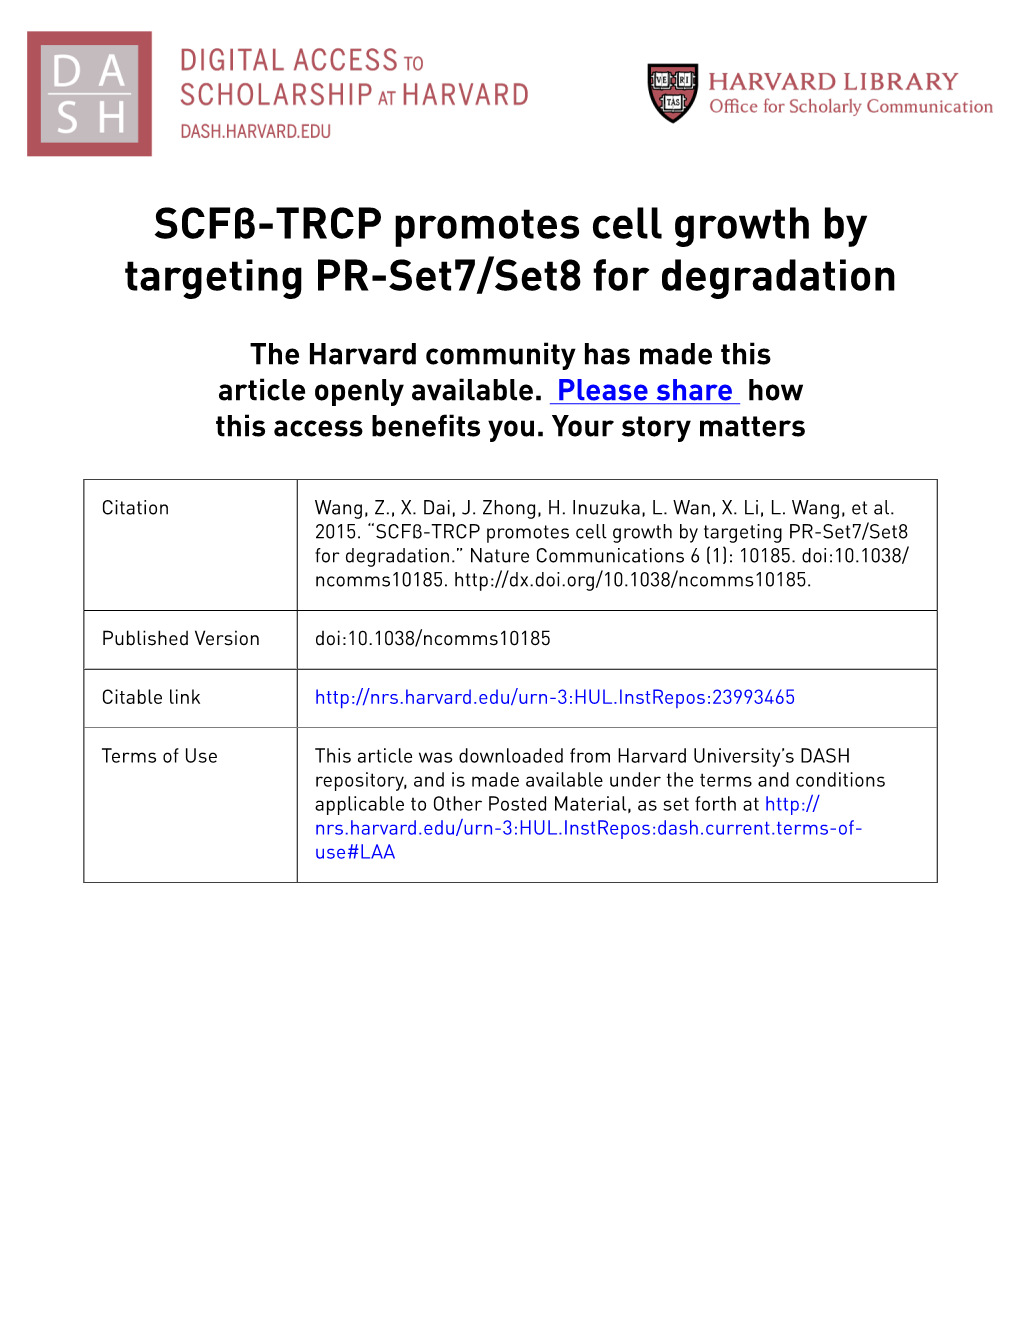 TRCP Promotes Cell Growth by Targeting PR-Set7/Set8 for Degradation